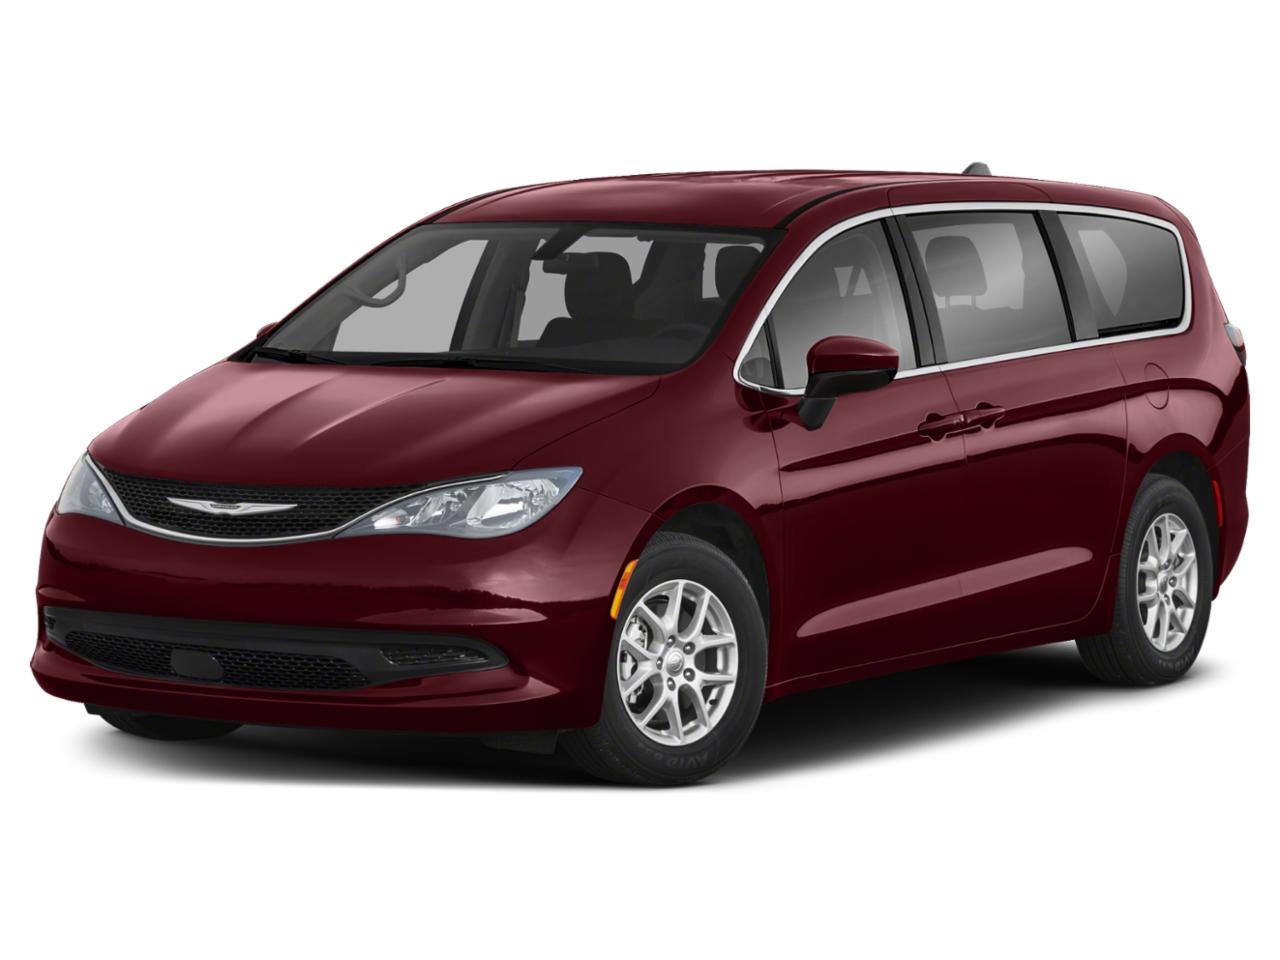 2021 Chrysler Voyager Vehicle Photo in Plainfield, IL 60586